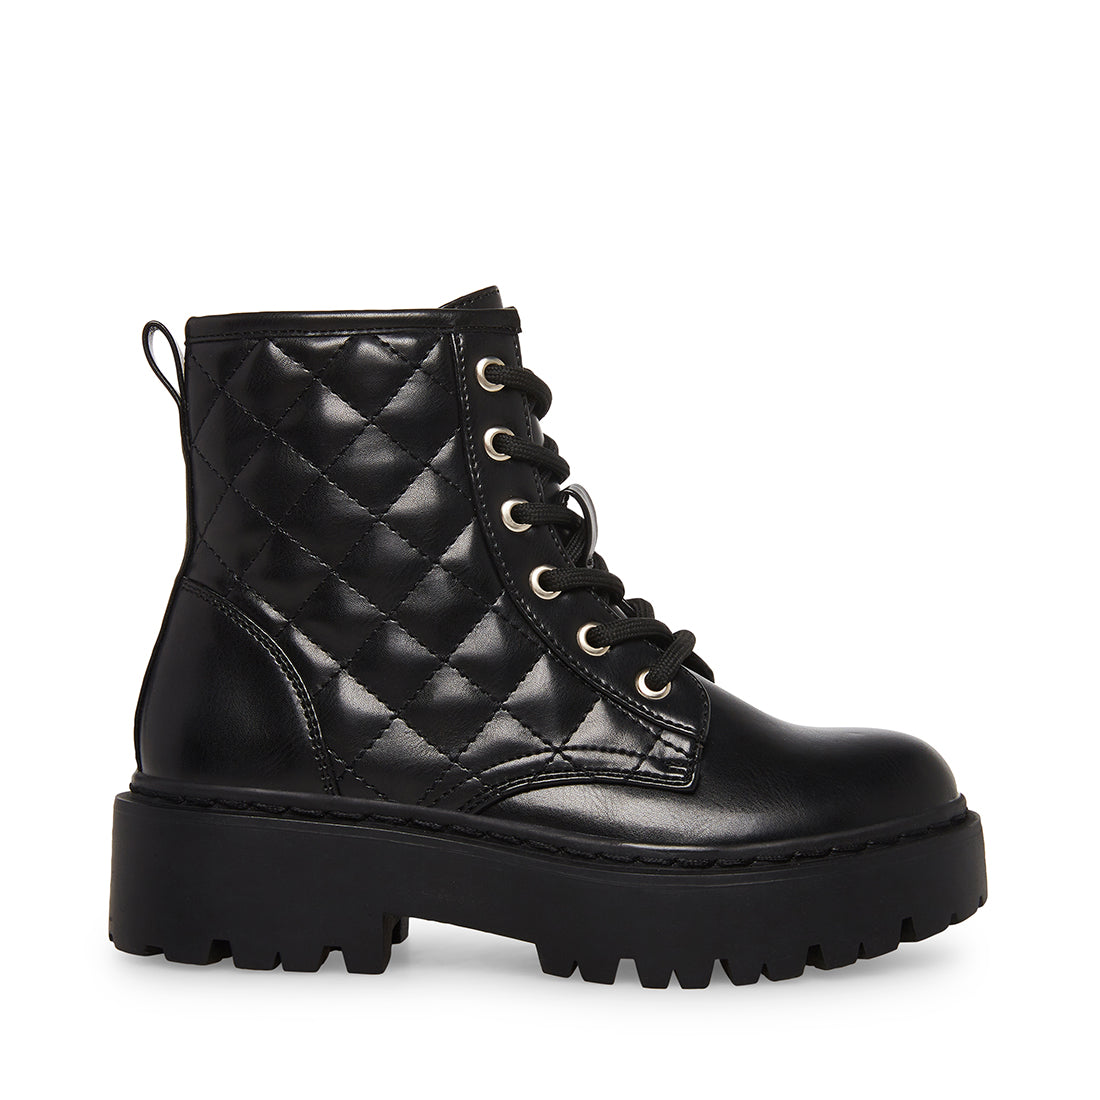 Steve Madden Bewilder lace front chunky heeled boots in black leather | ASOS